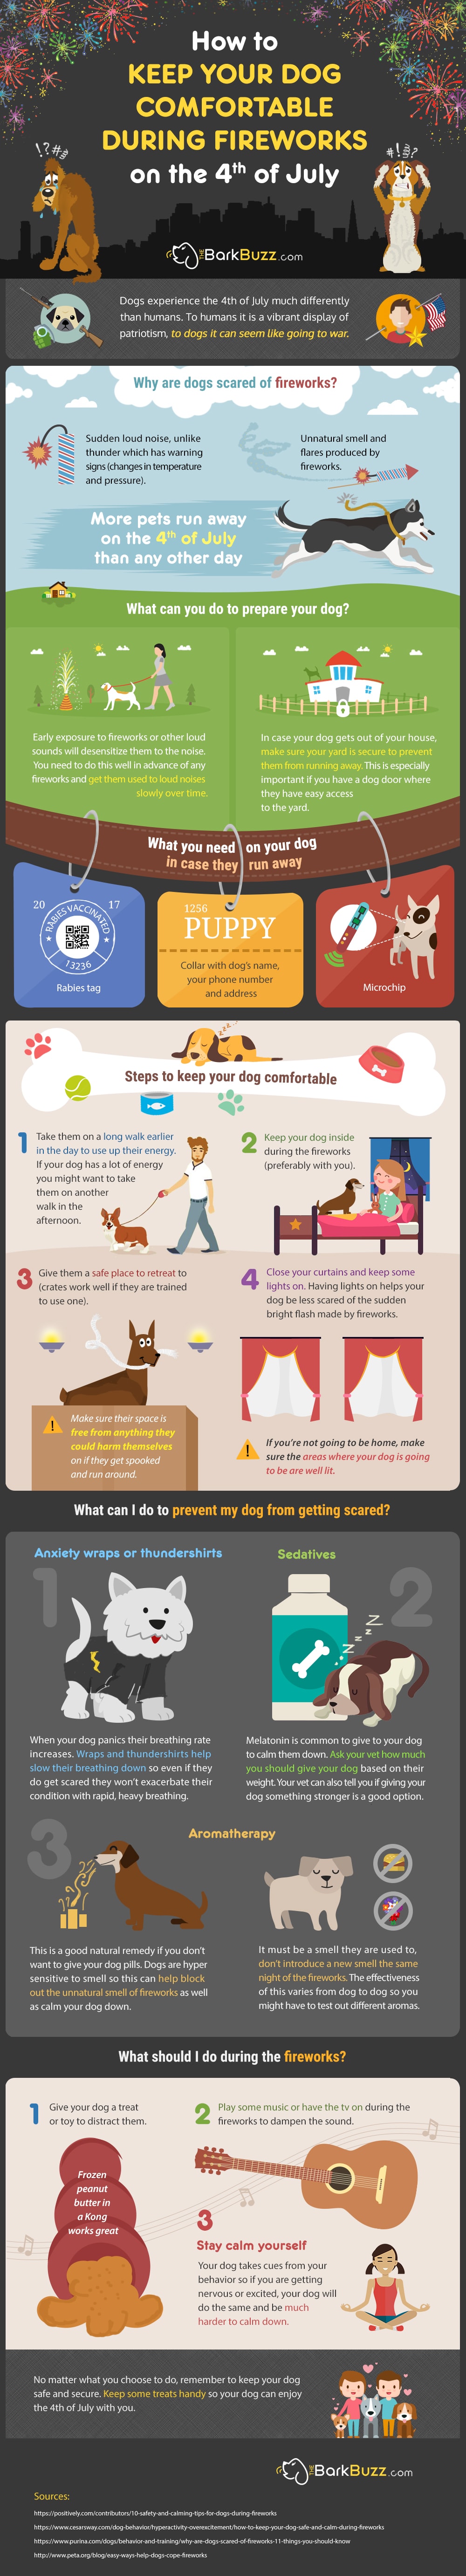 How-to-keep-your-dog-comfortable-during-fireworks-on-the-4th-of-July-compressed